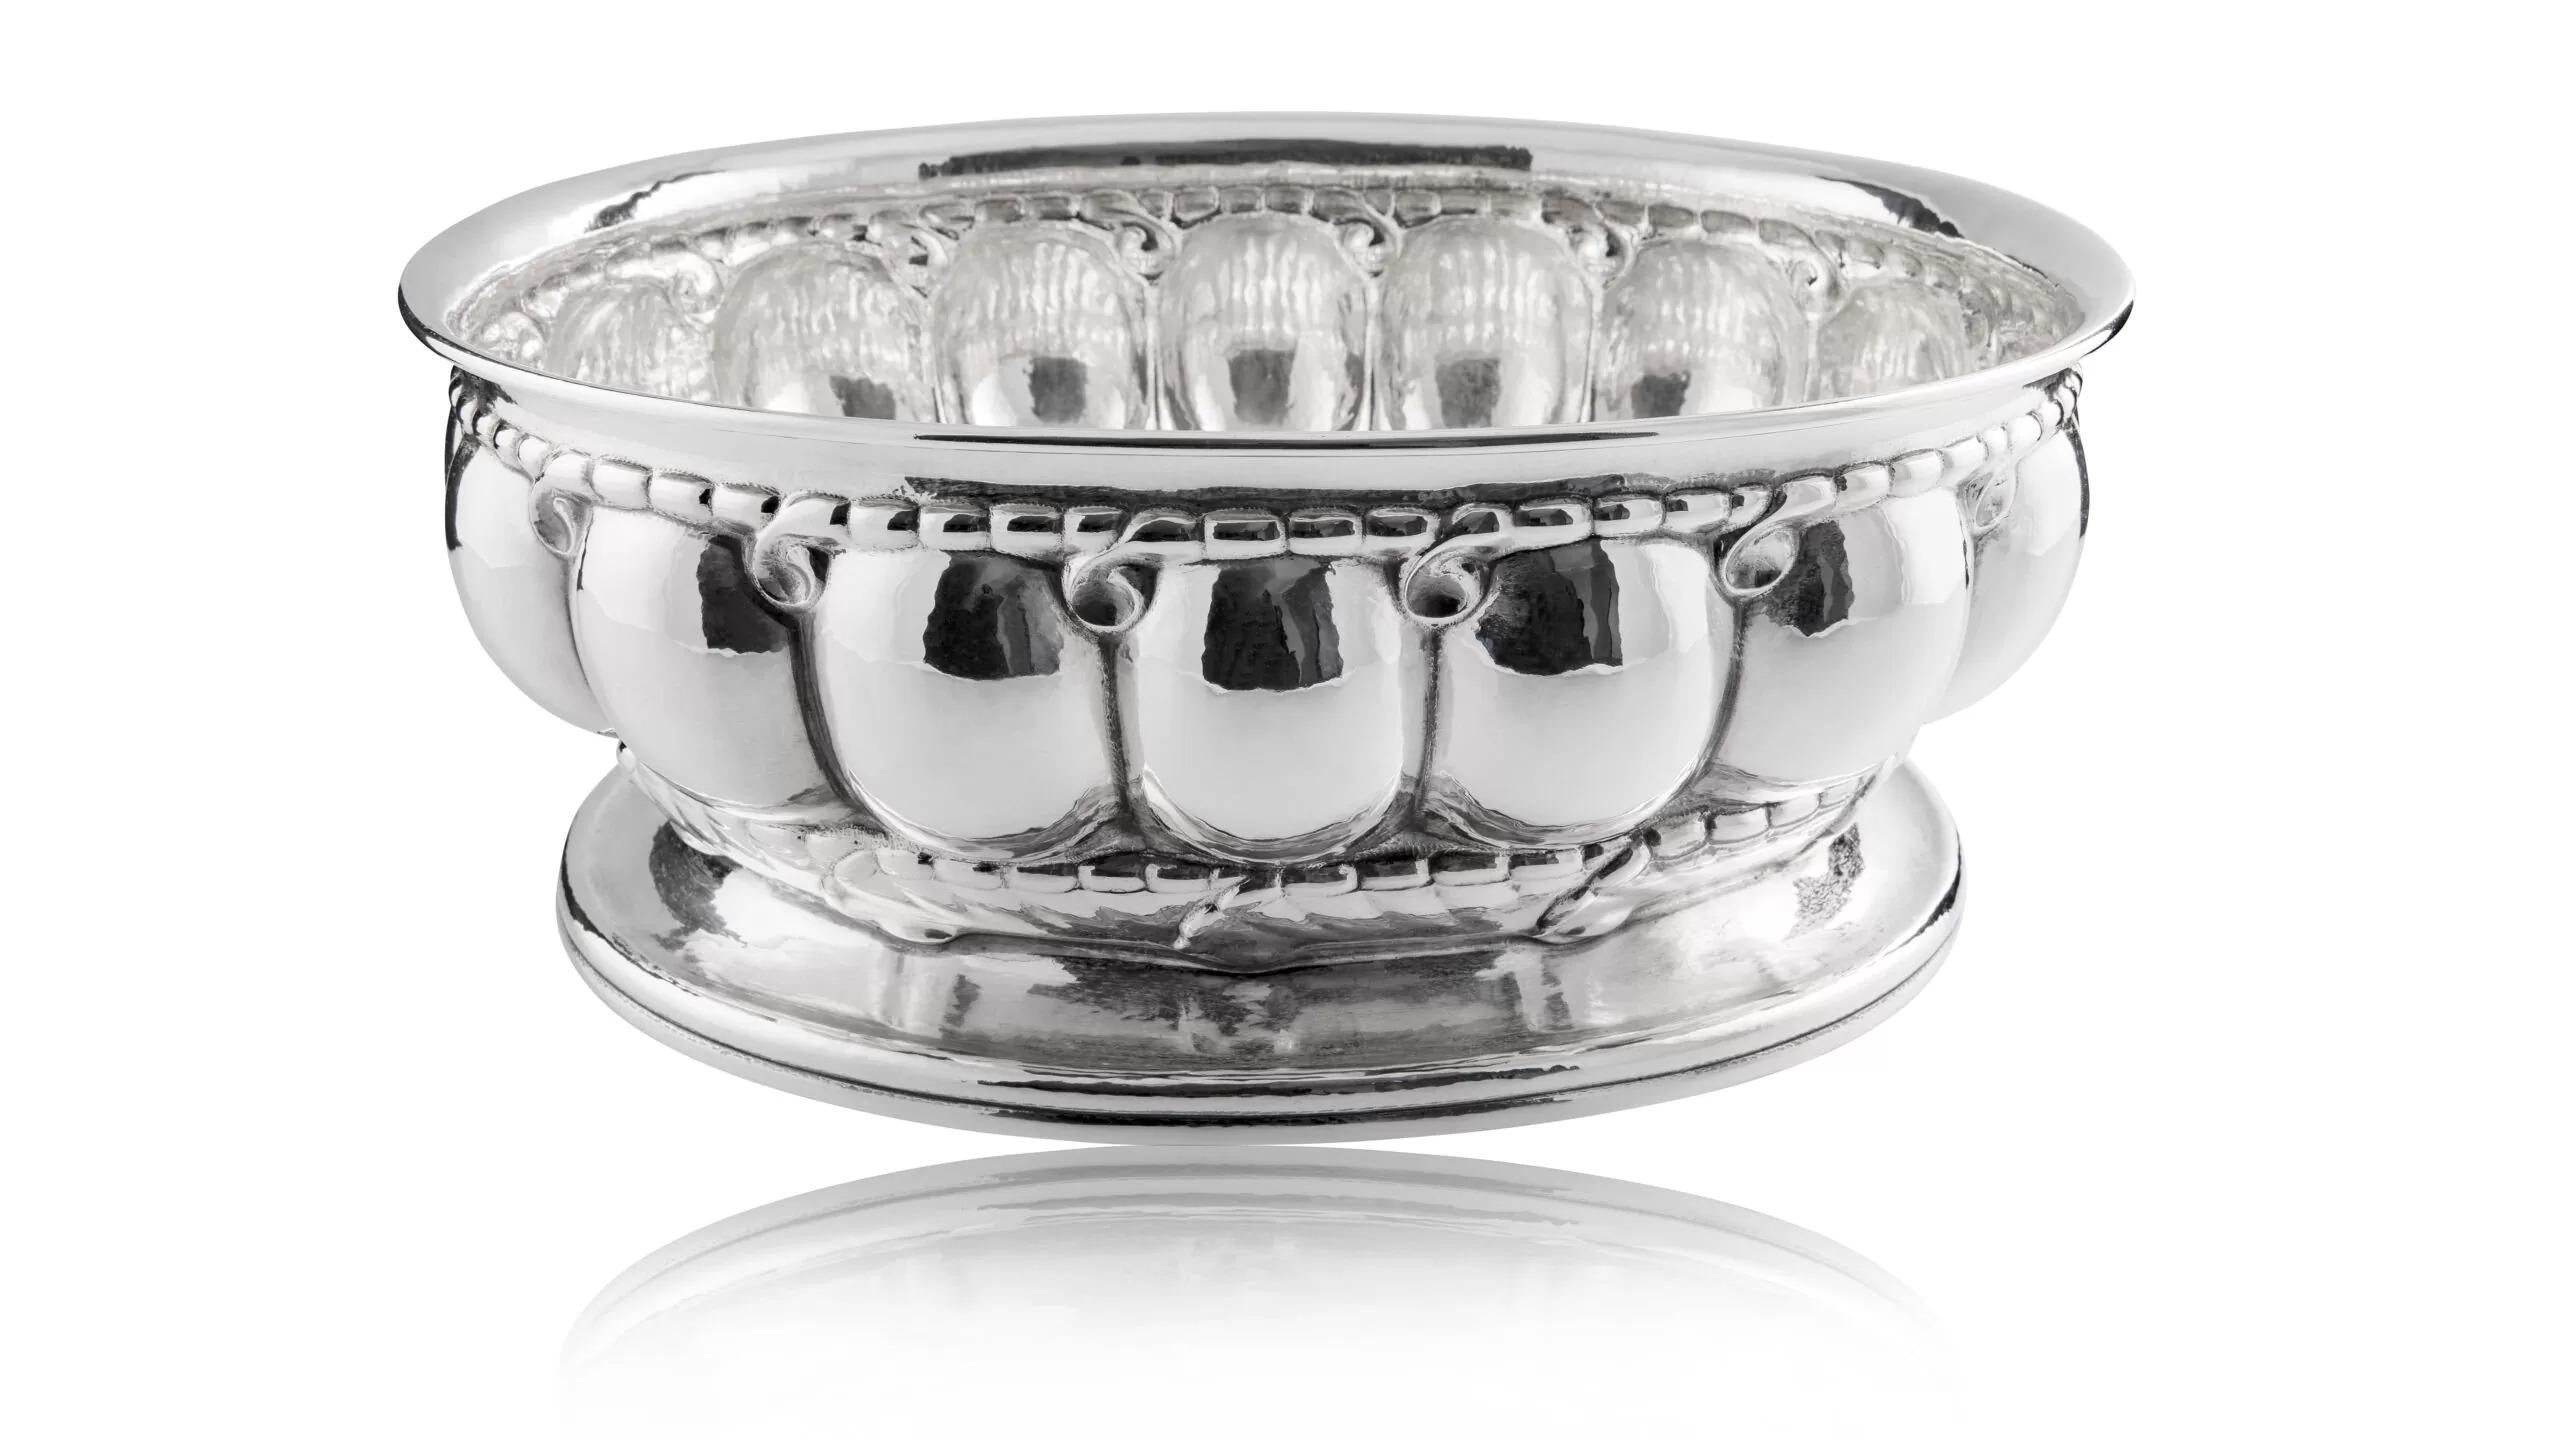 A large early Georg Jensen sterling silver centerpiece bowl, design #189 from 1914 by Georg Jensen, this design often called 